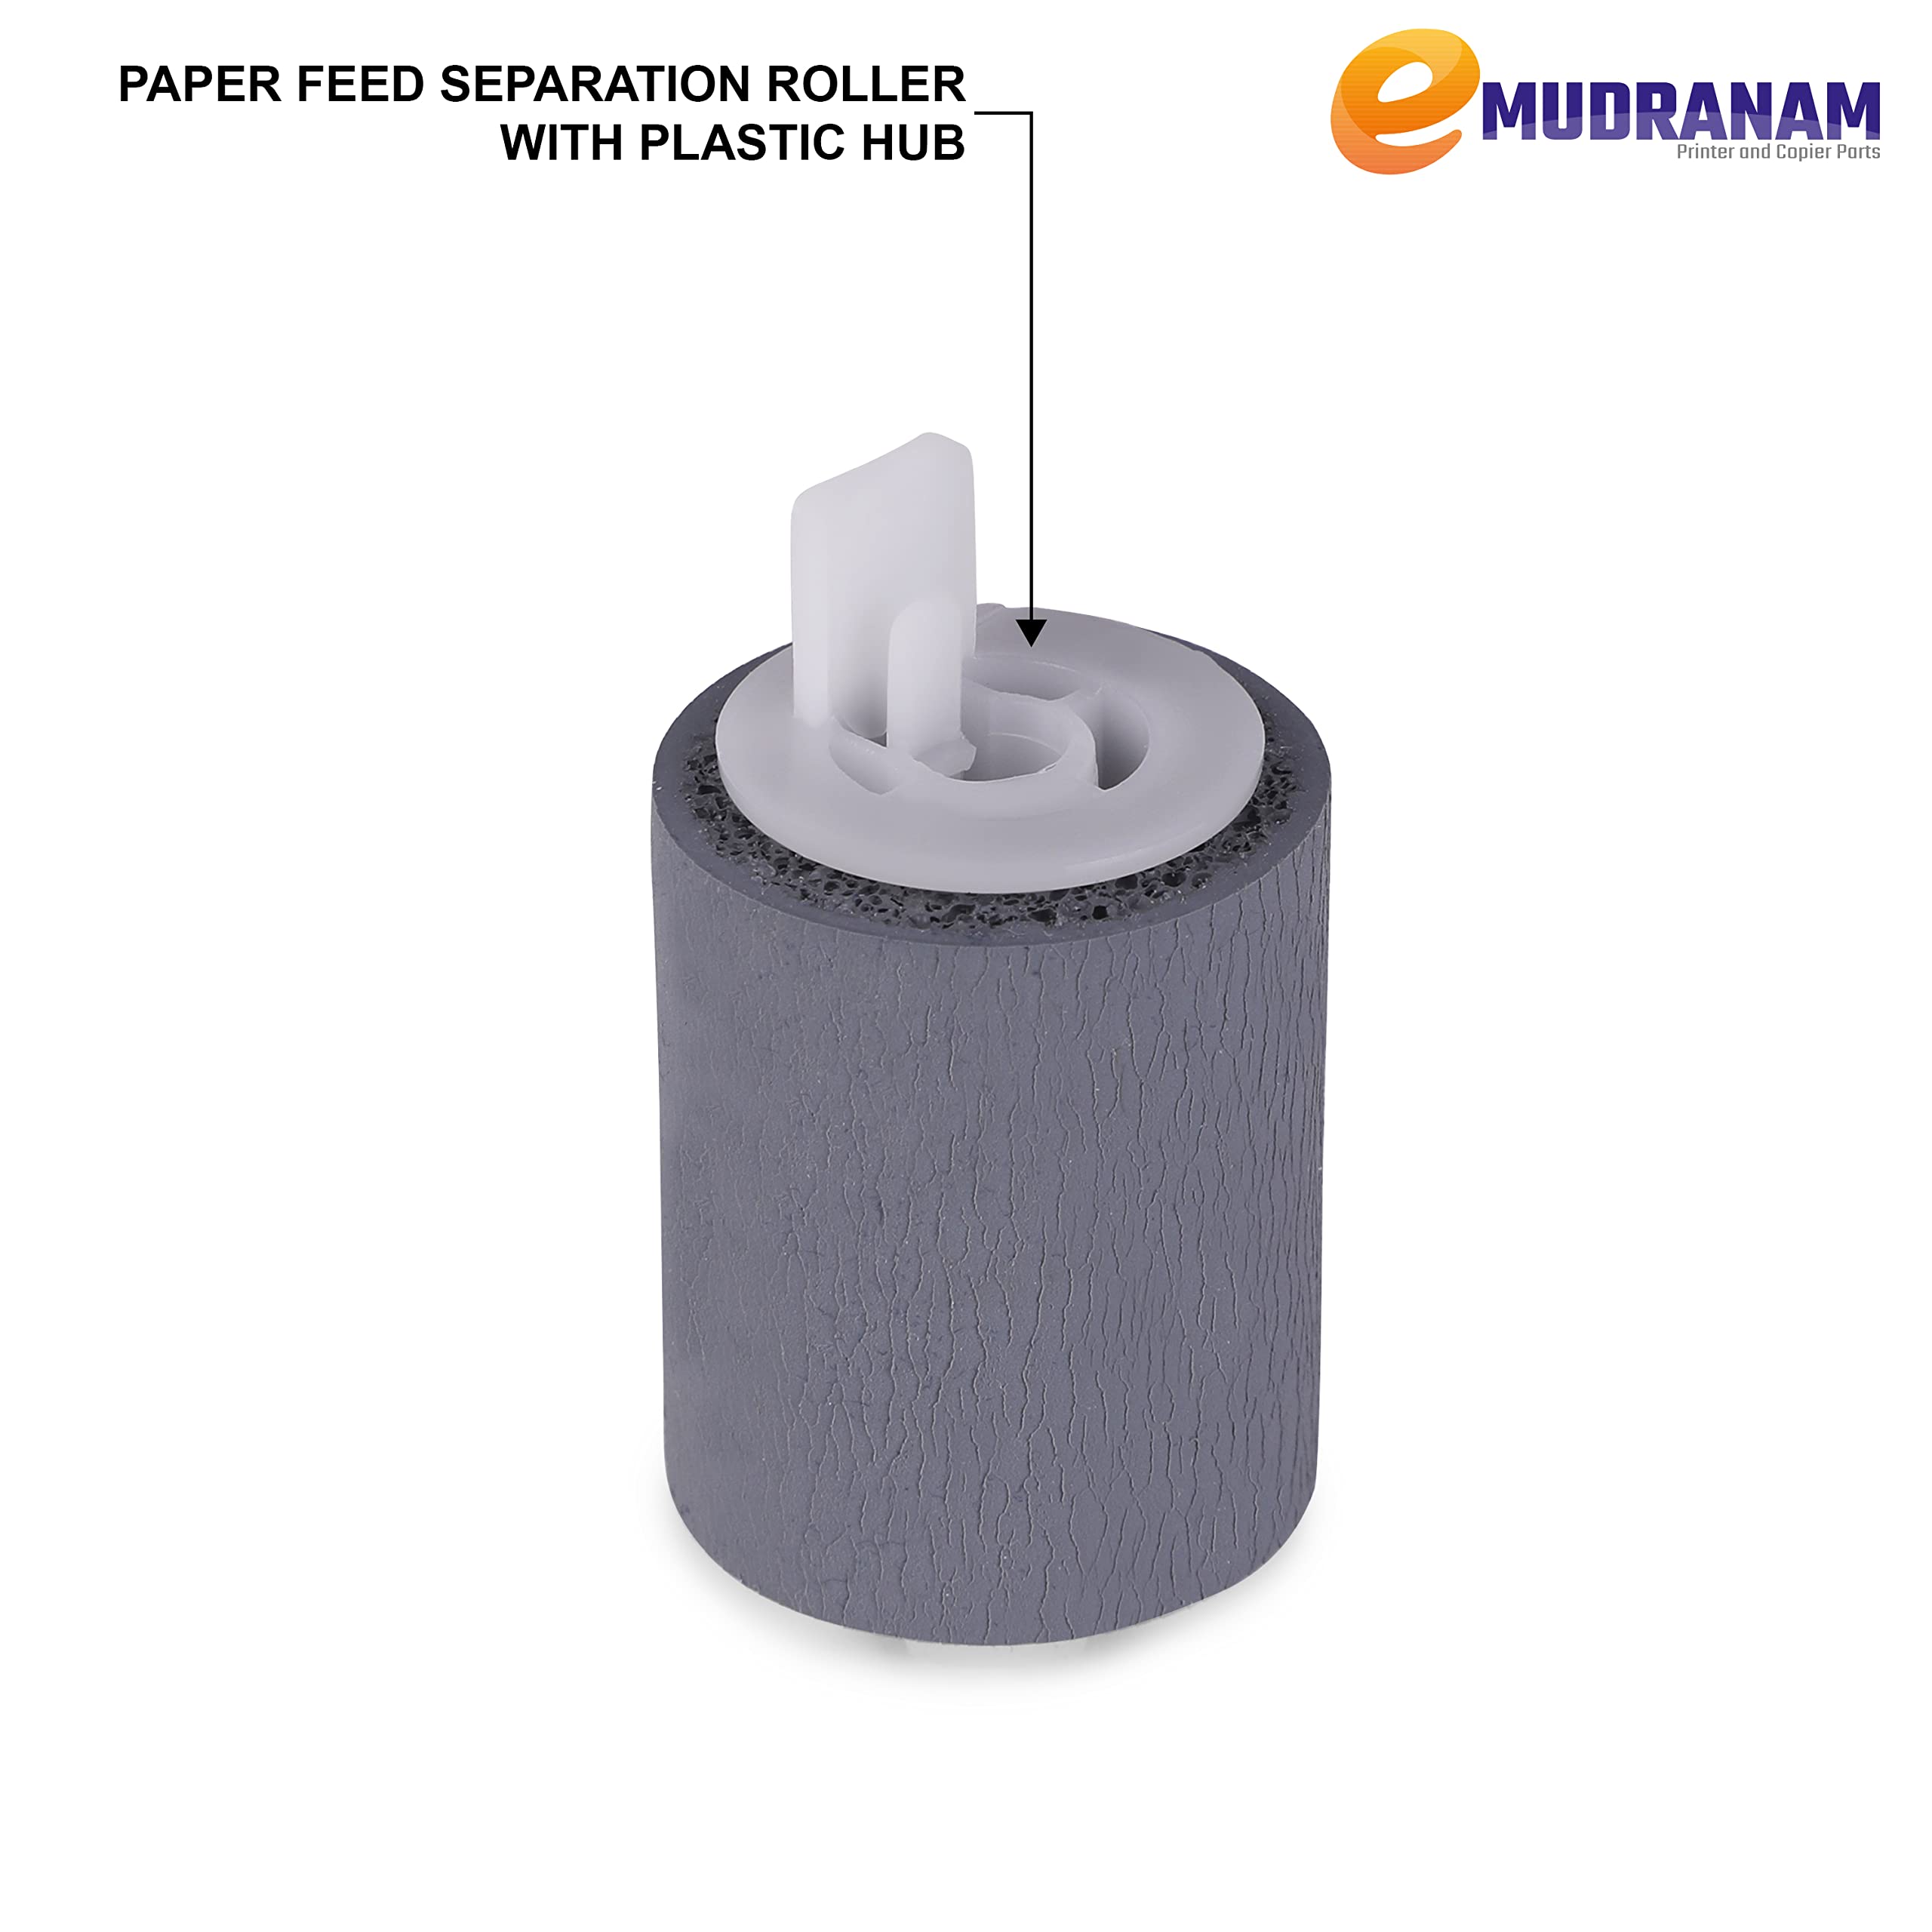 eMudranam Paper Feed Separation Roller with Plastic Hub | FC6-6661-000 | FC6 6661 000